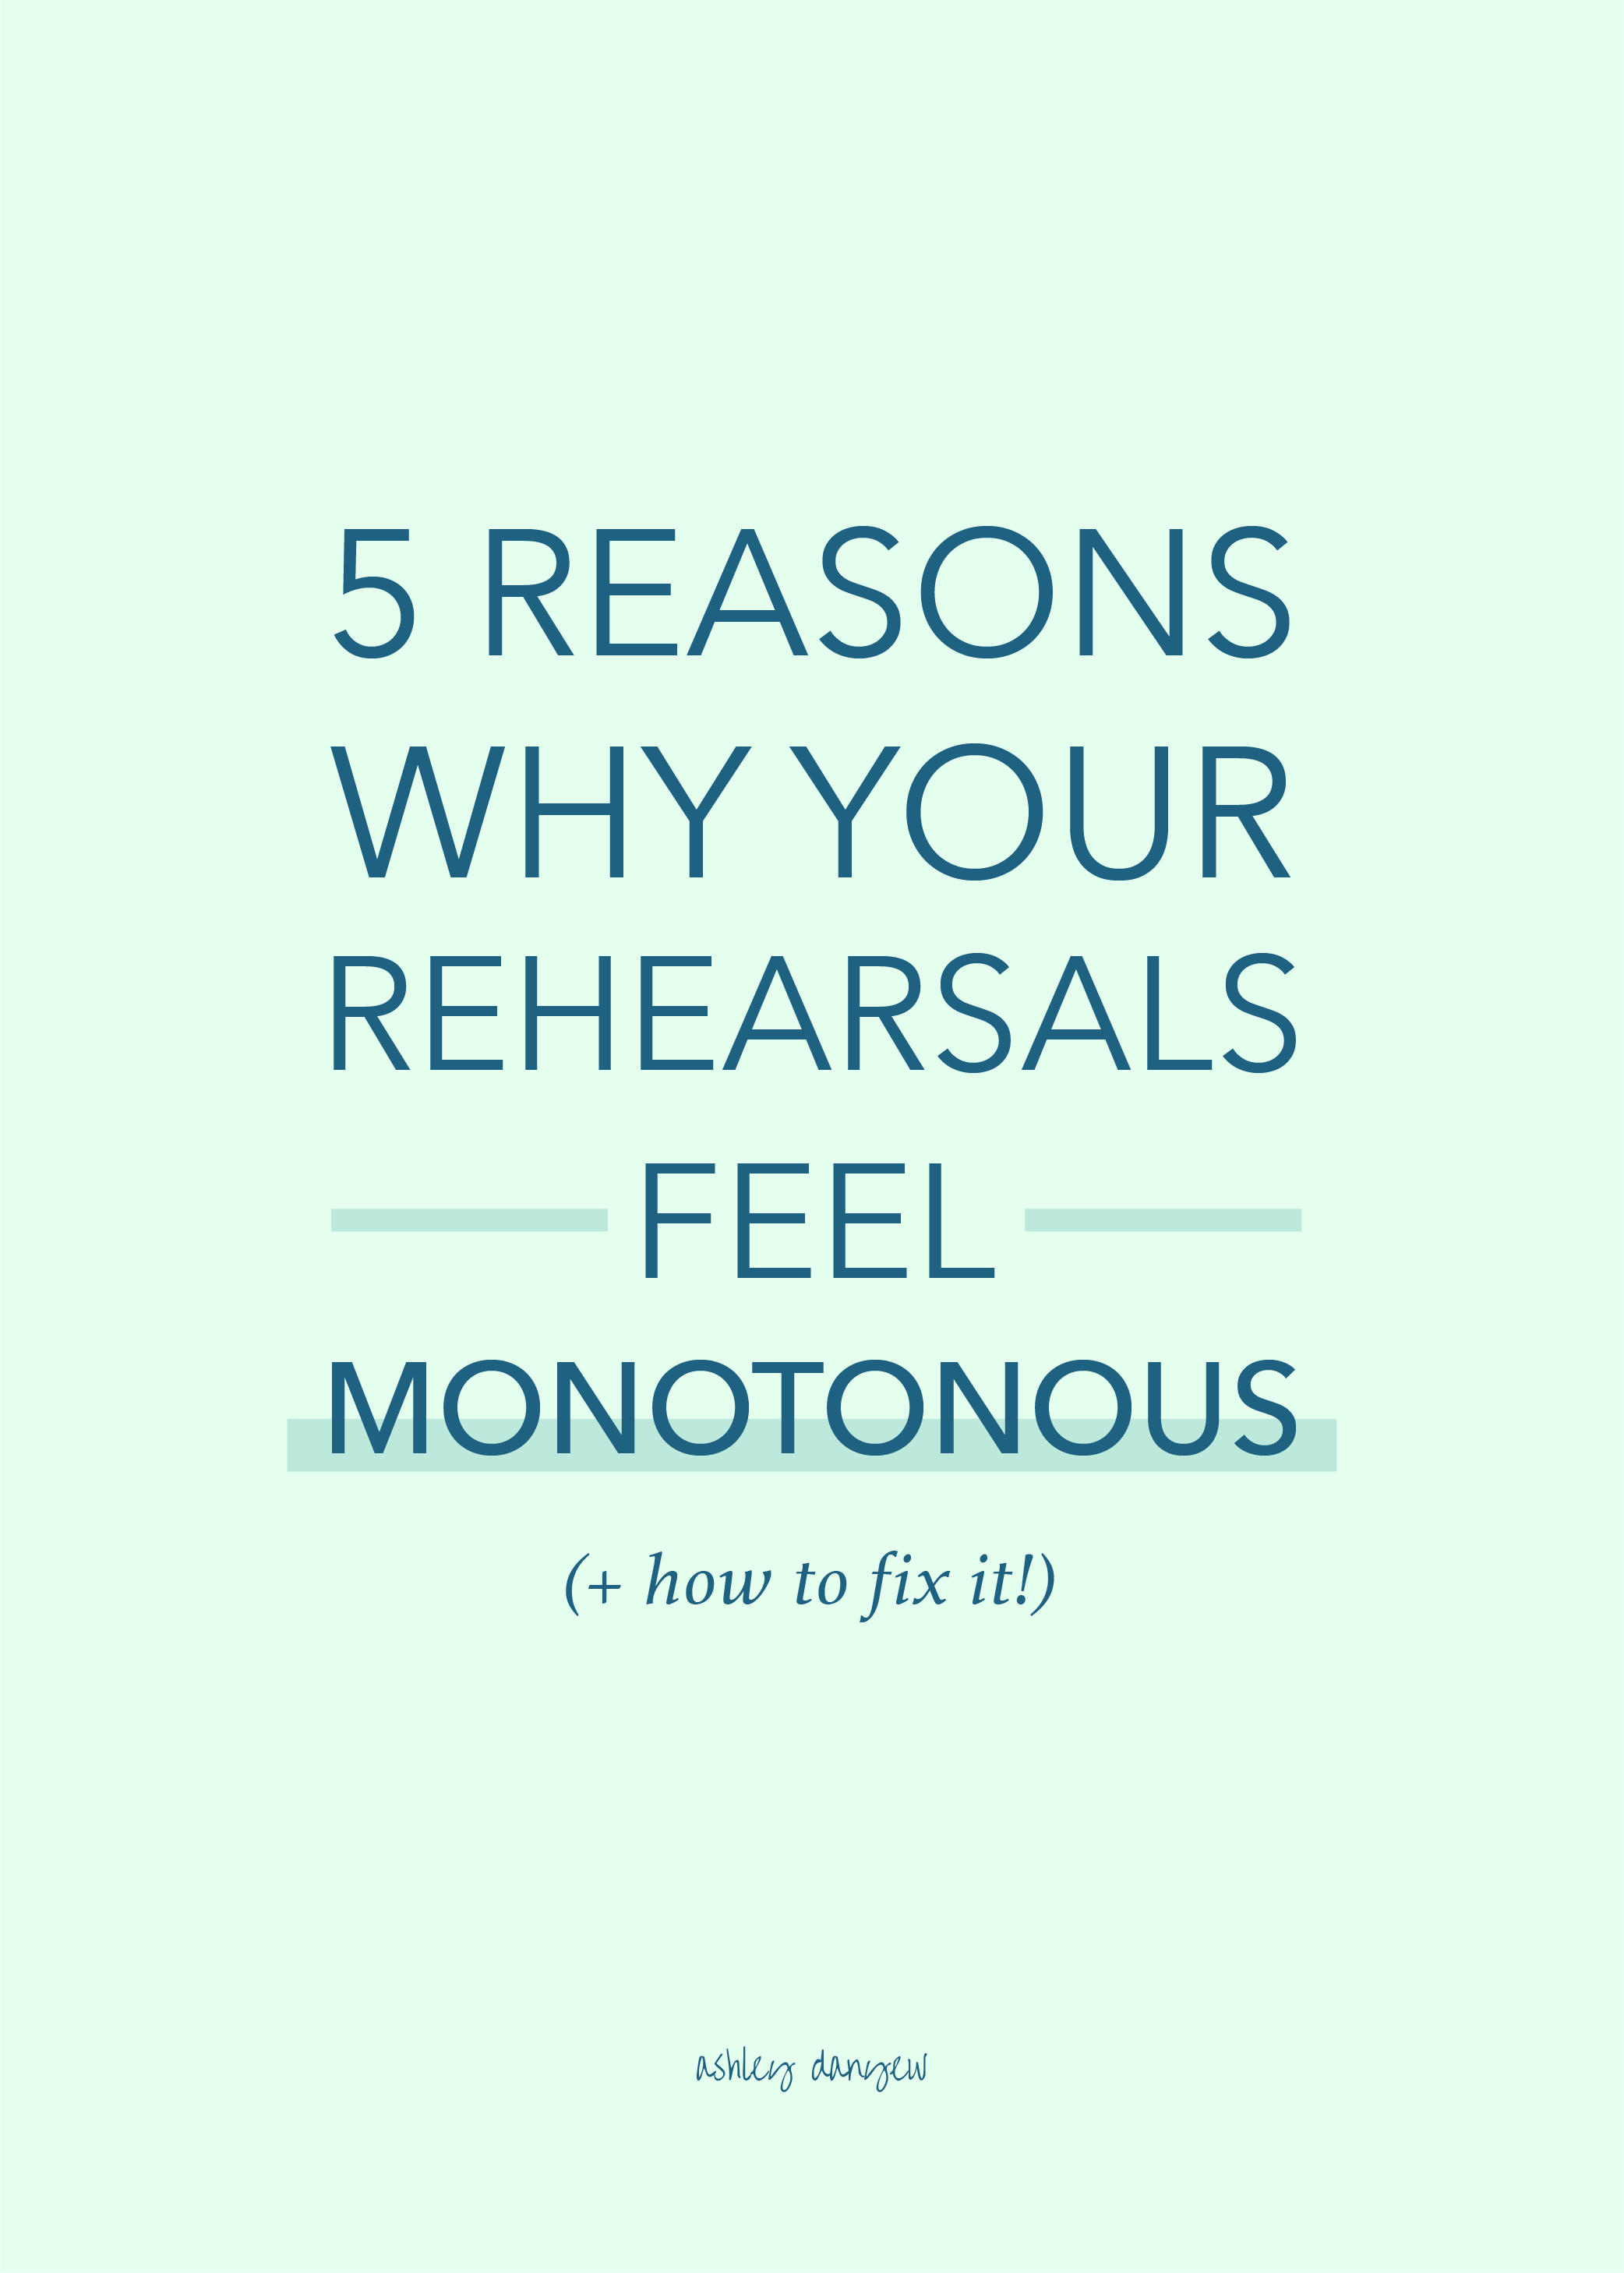 5 Reasons Why Your Rehearsals Feel Monotonous (+ How to Fix It!)